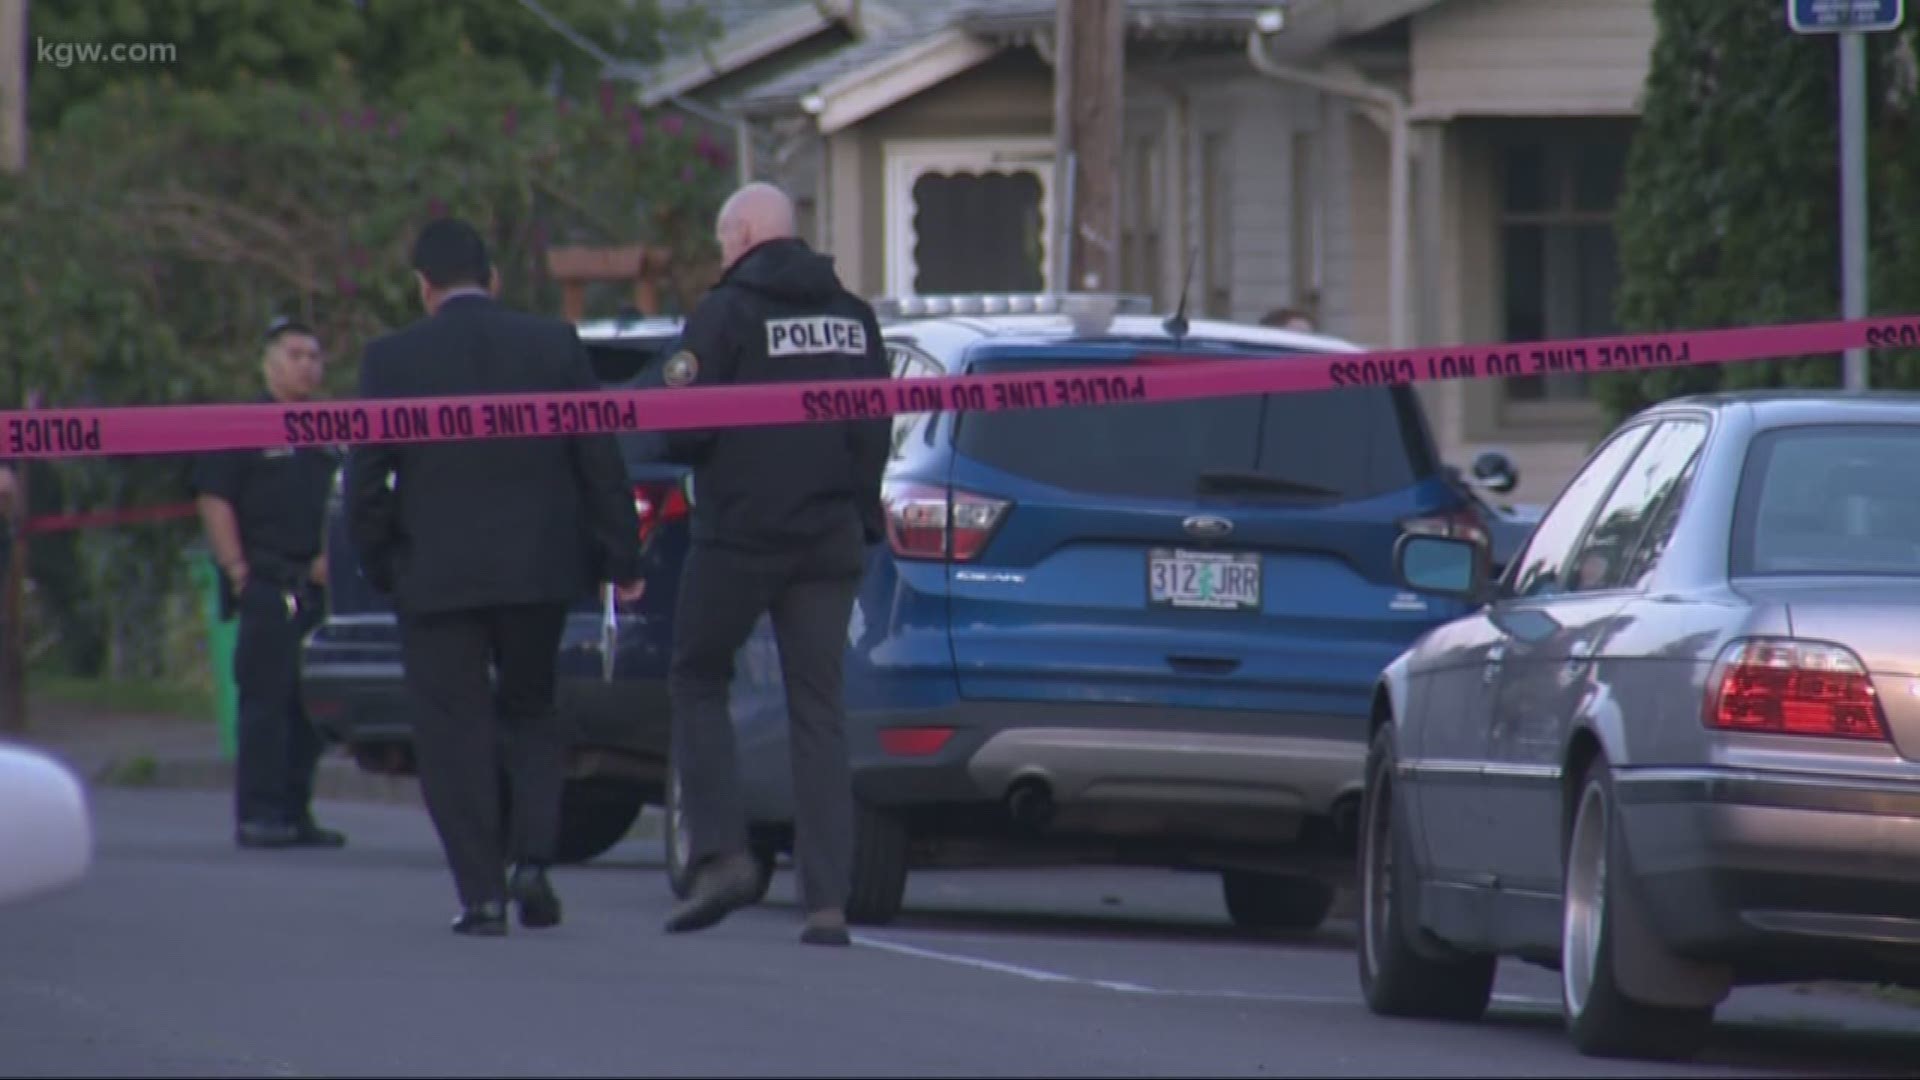 Portland police are investigating a shooting in Southeast Portland that occurred Wednesday evening.